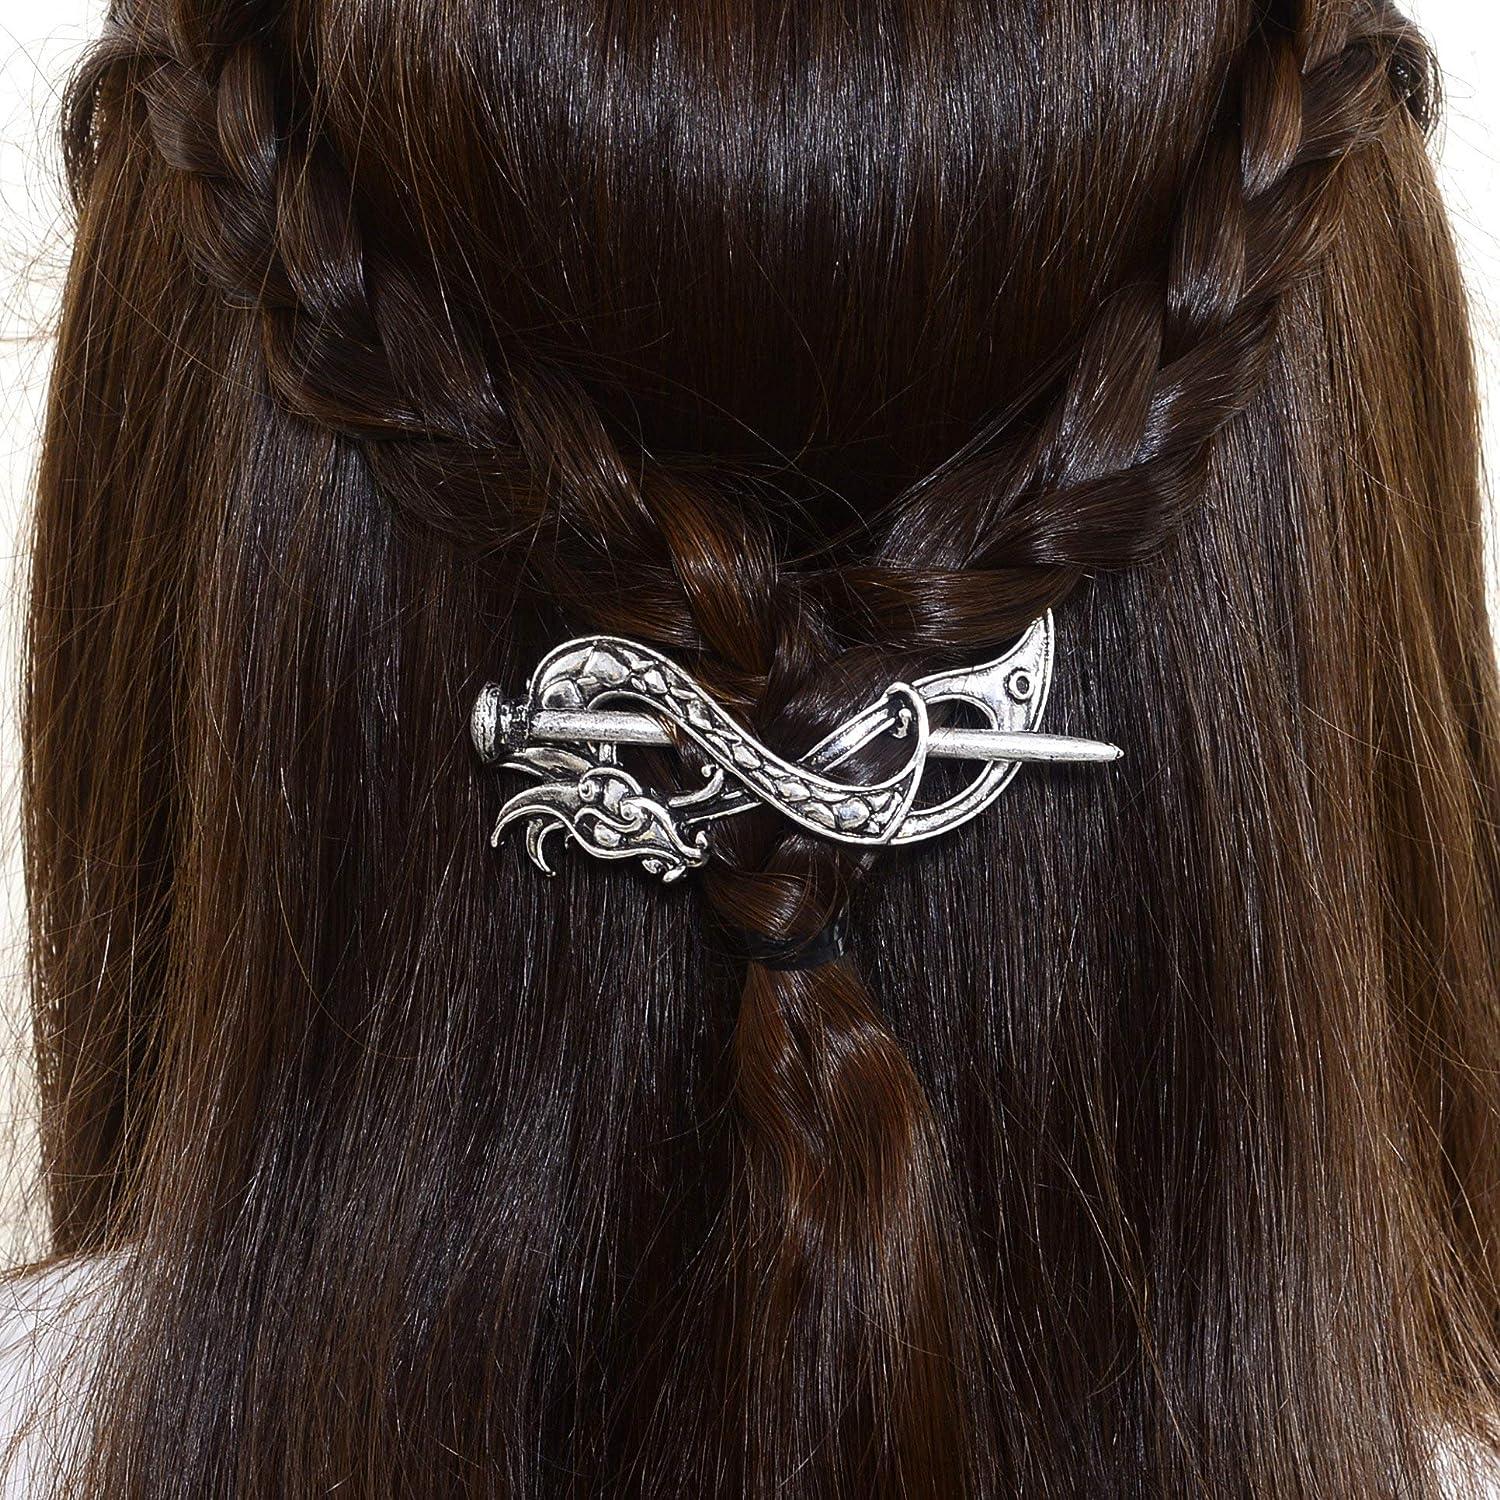 Norse Viking hair clip barrette celtic viking knot wicca vintage Hairpin  Wedding Accessories